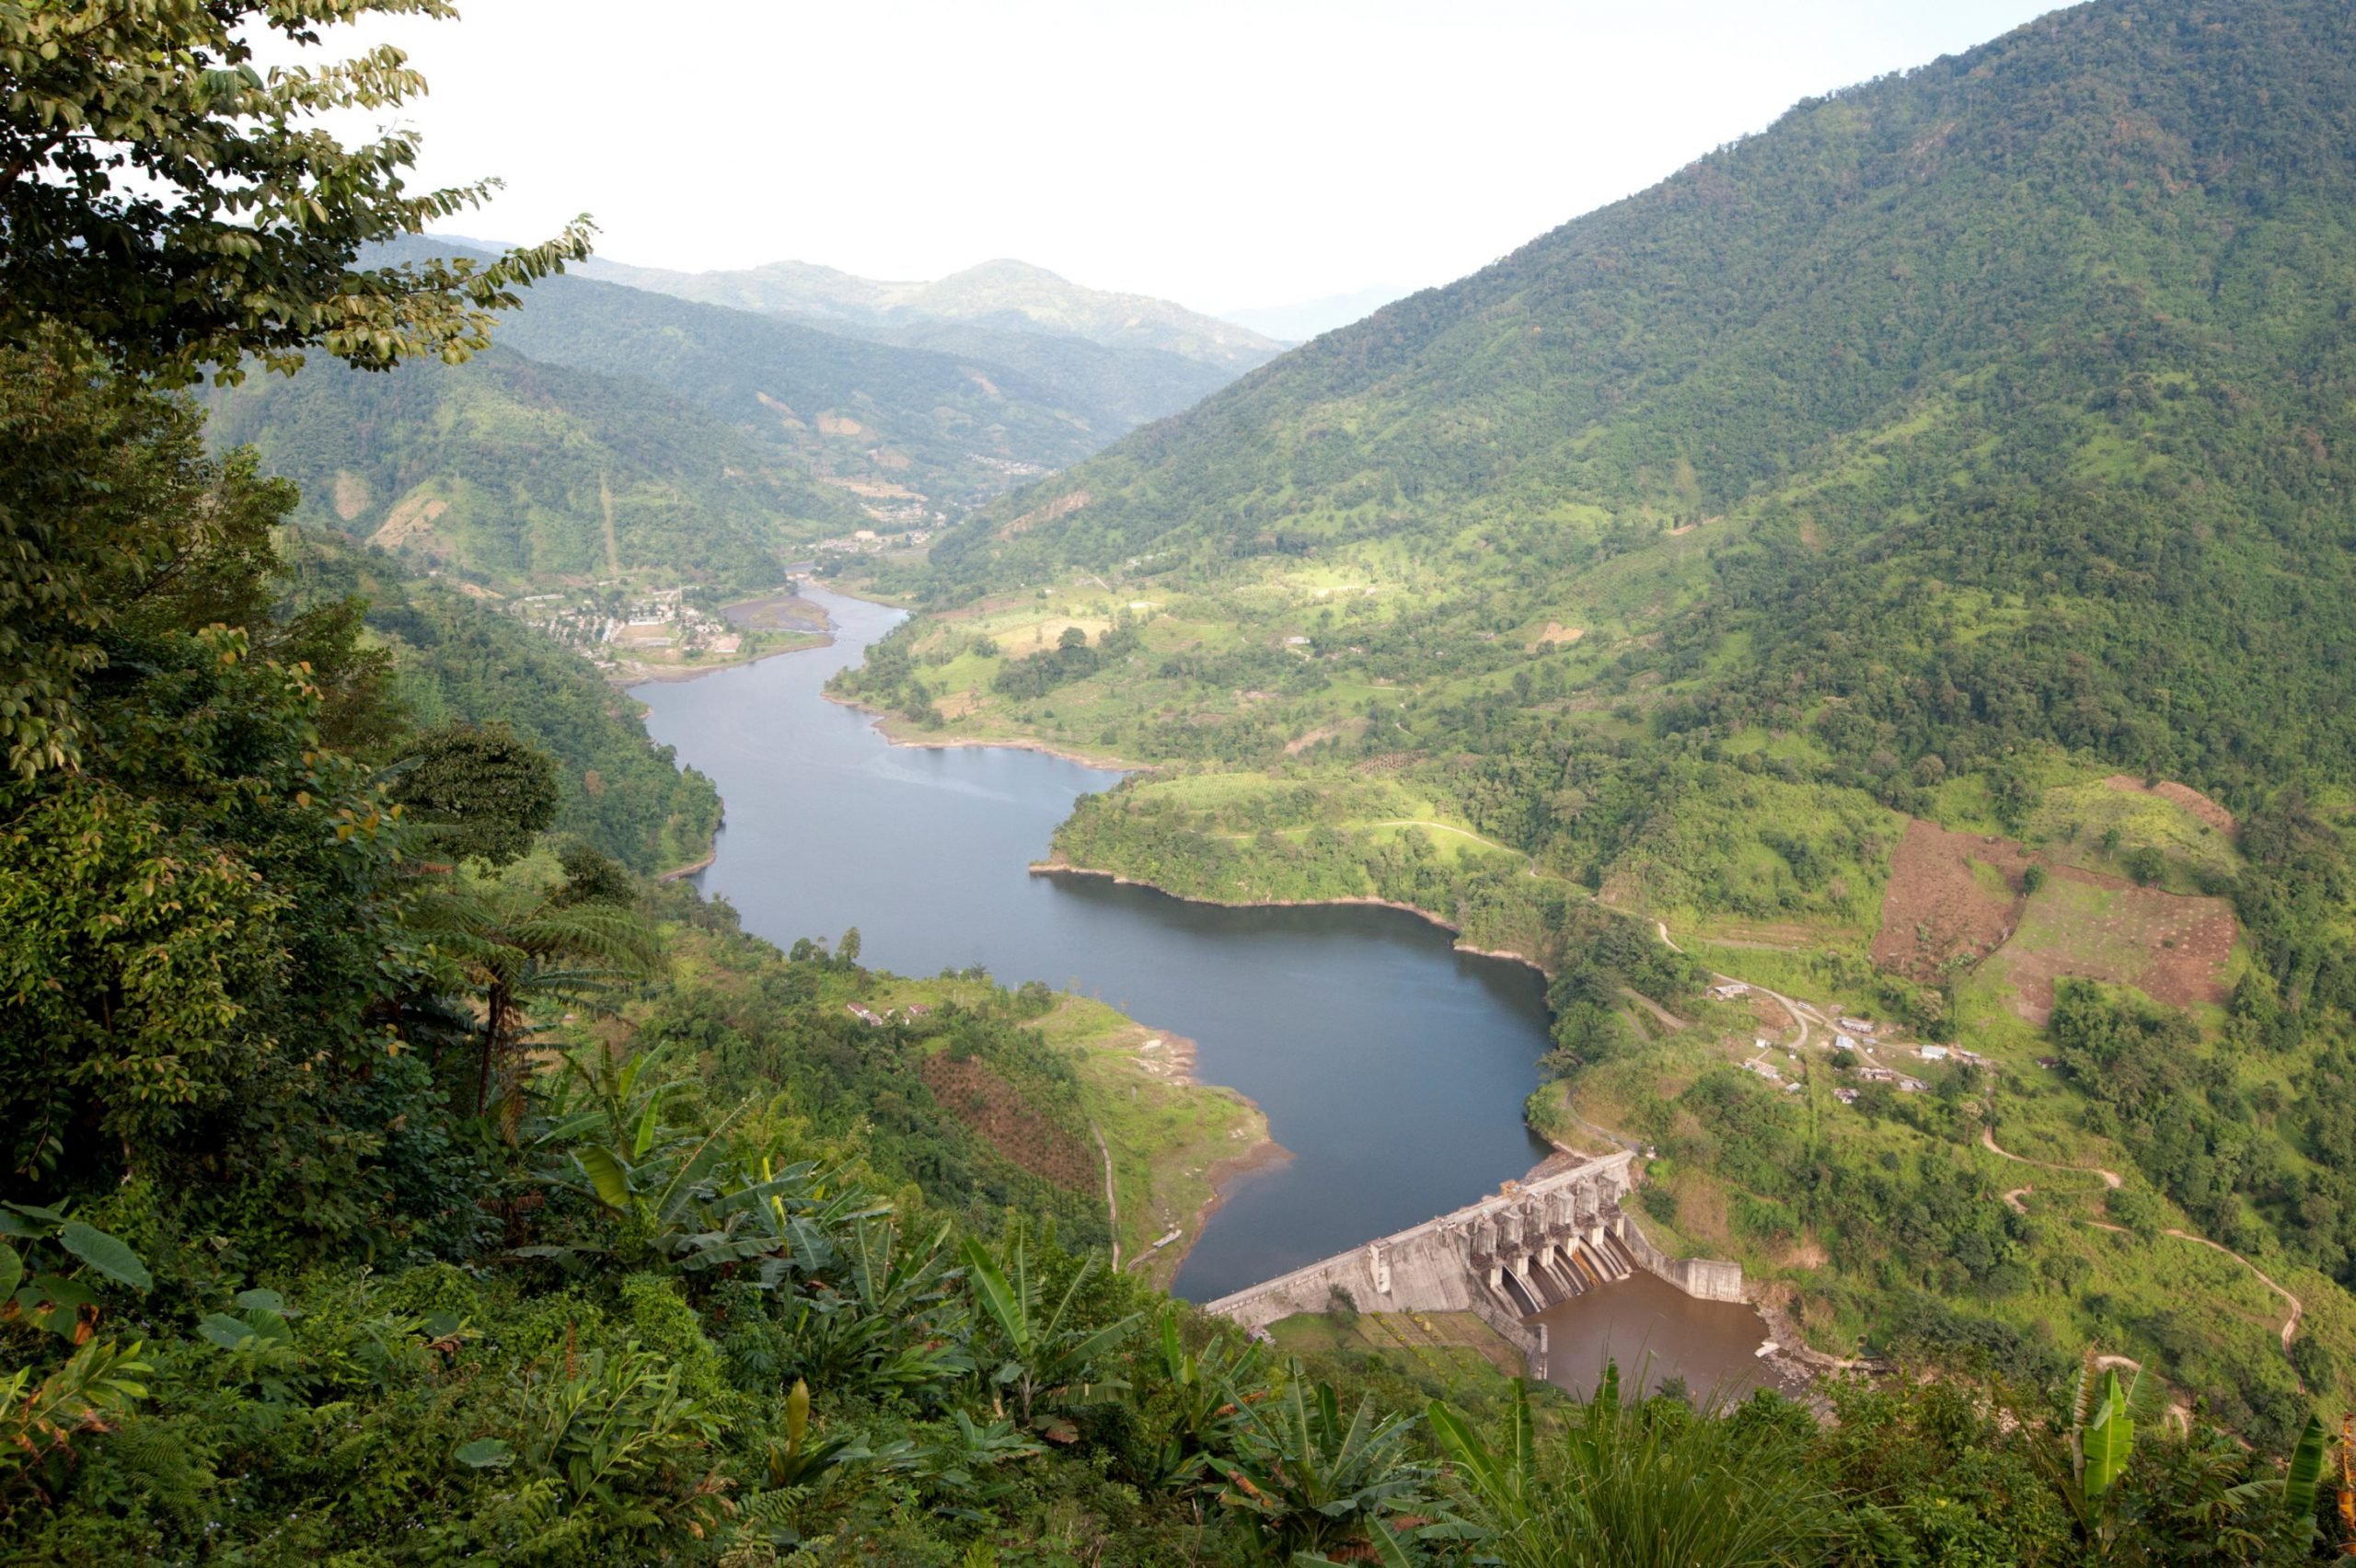 <p>A hydroelectric dam in Arunachal Pradesh, where over 160 dam projects are planned [image by: Robert Harding/Alamy]</p>